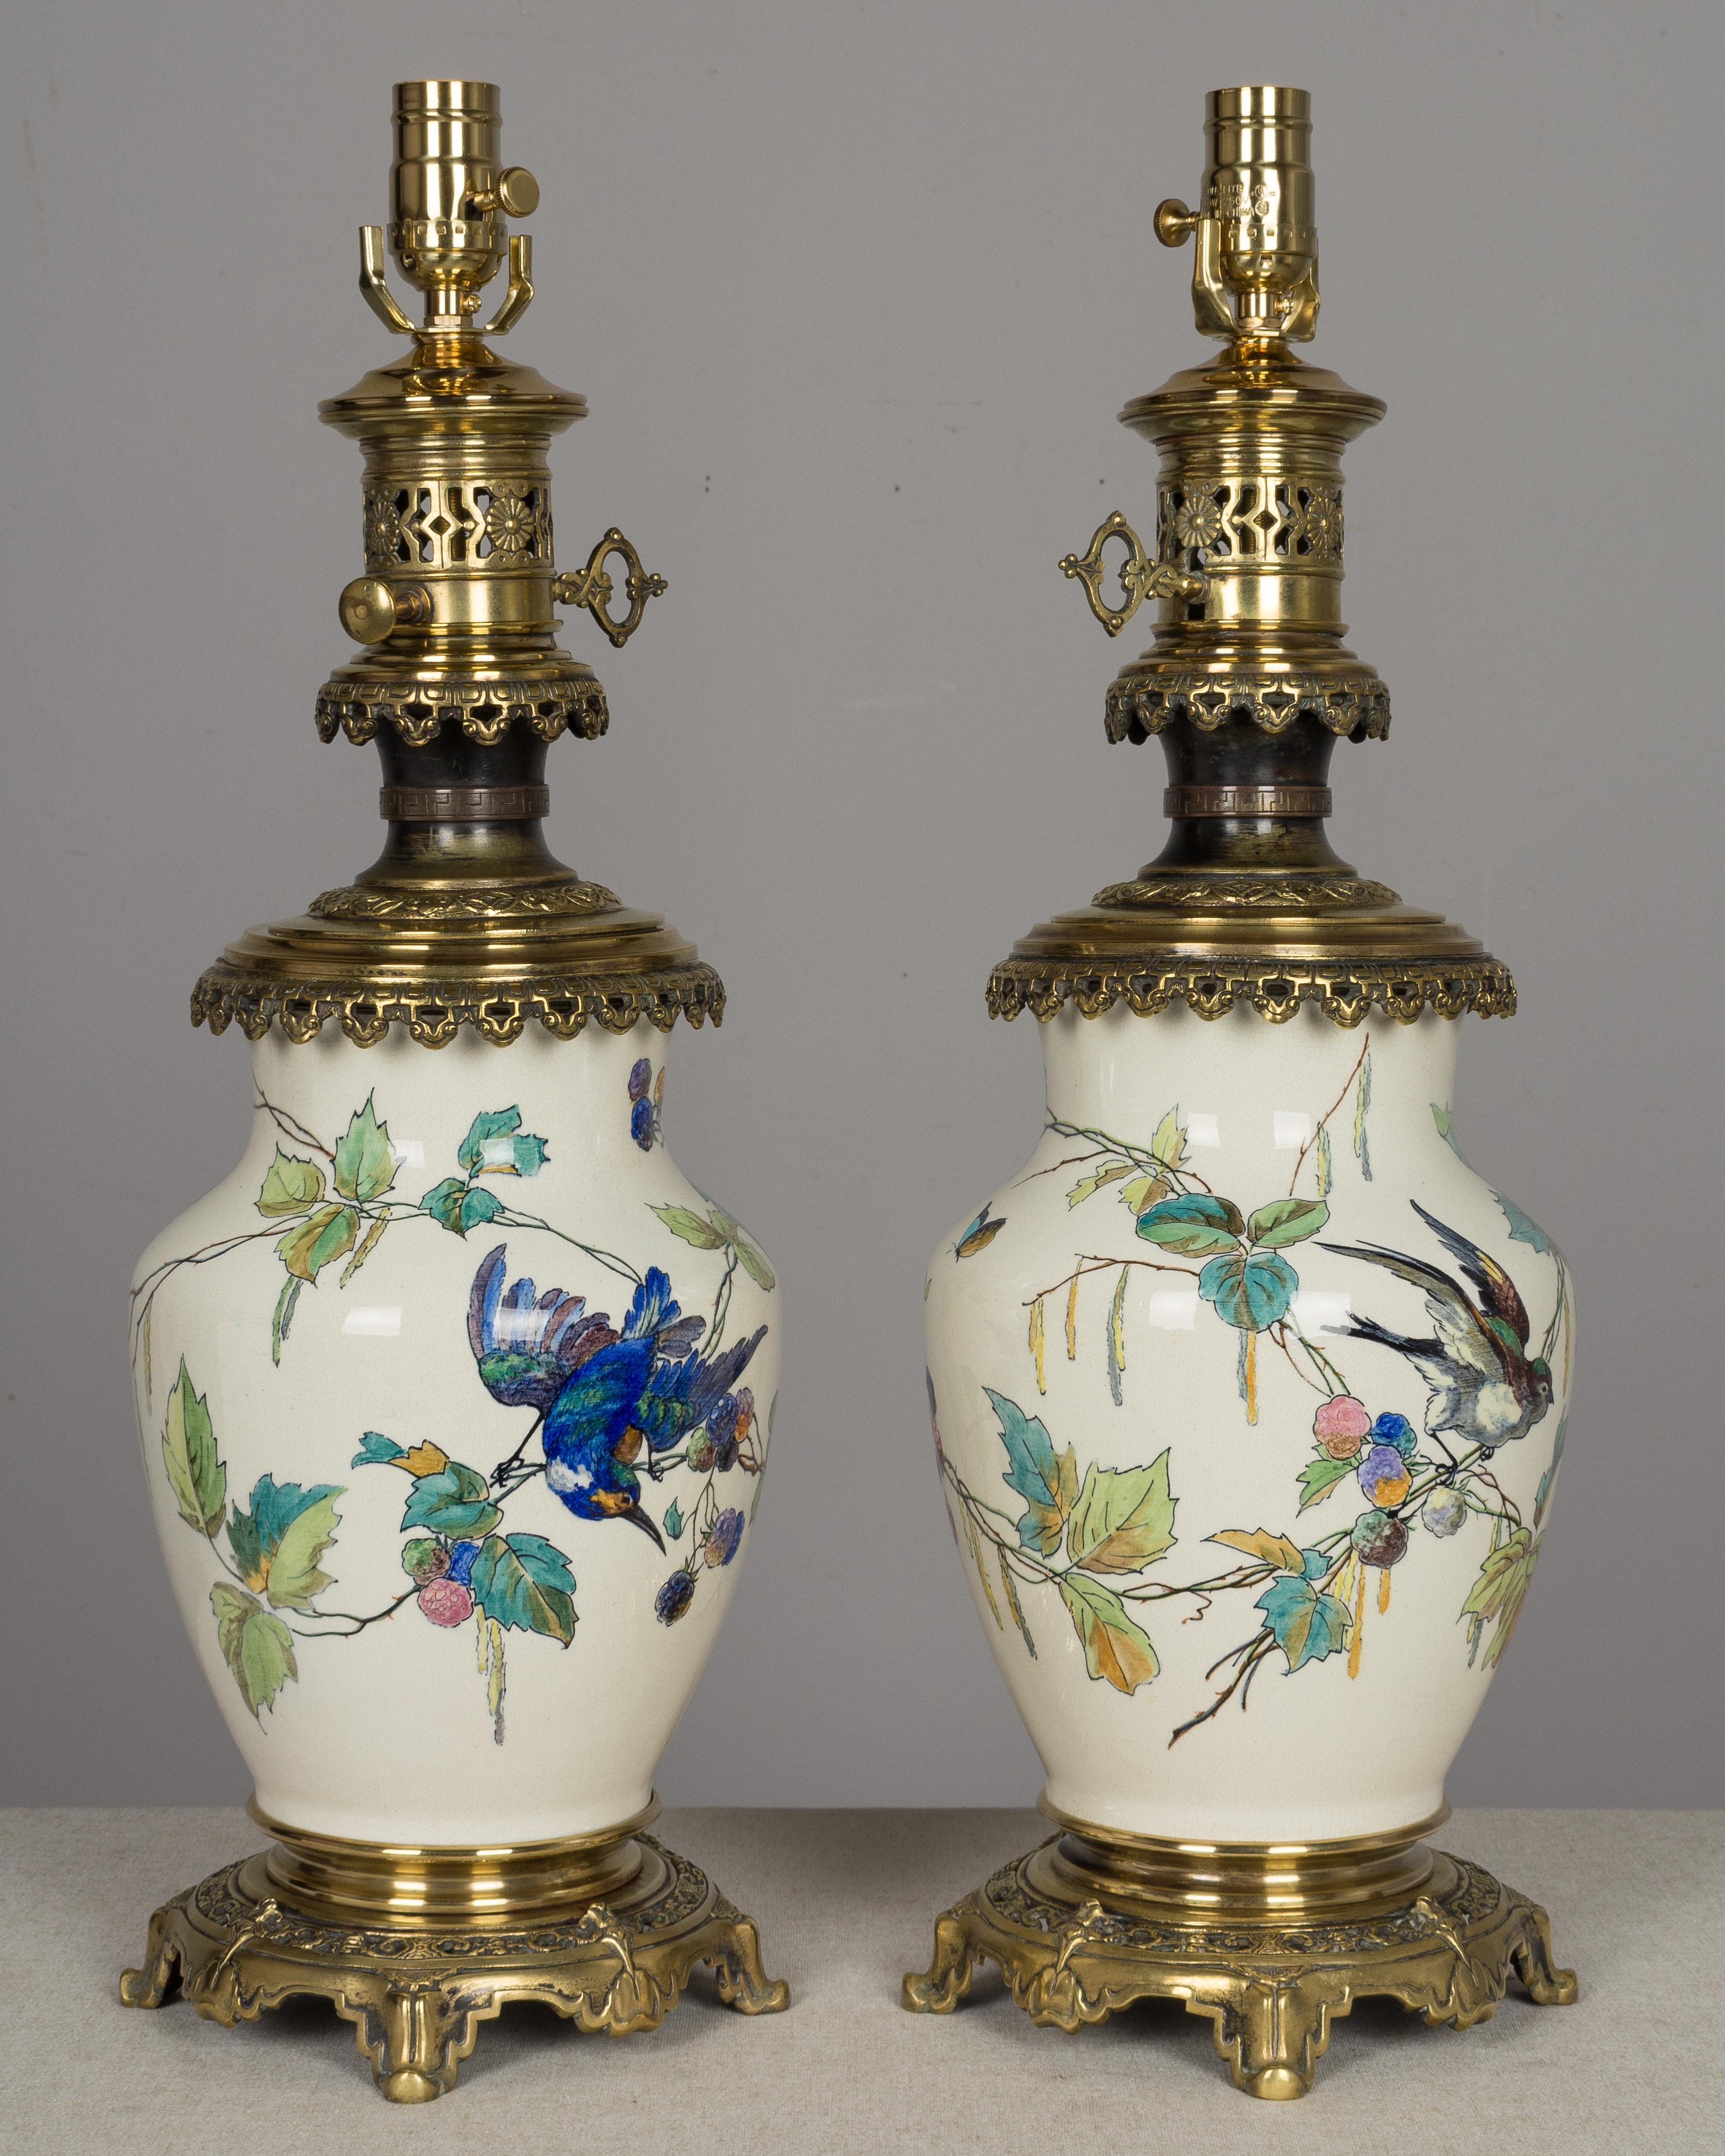 Cast Pair of Bronze-Mounted Sevres Ceramic Lamps in the Manner of Theodore Deck